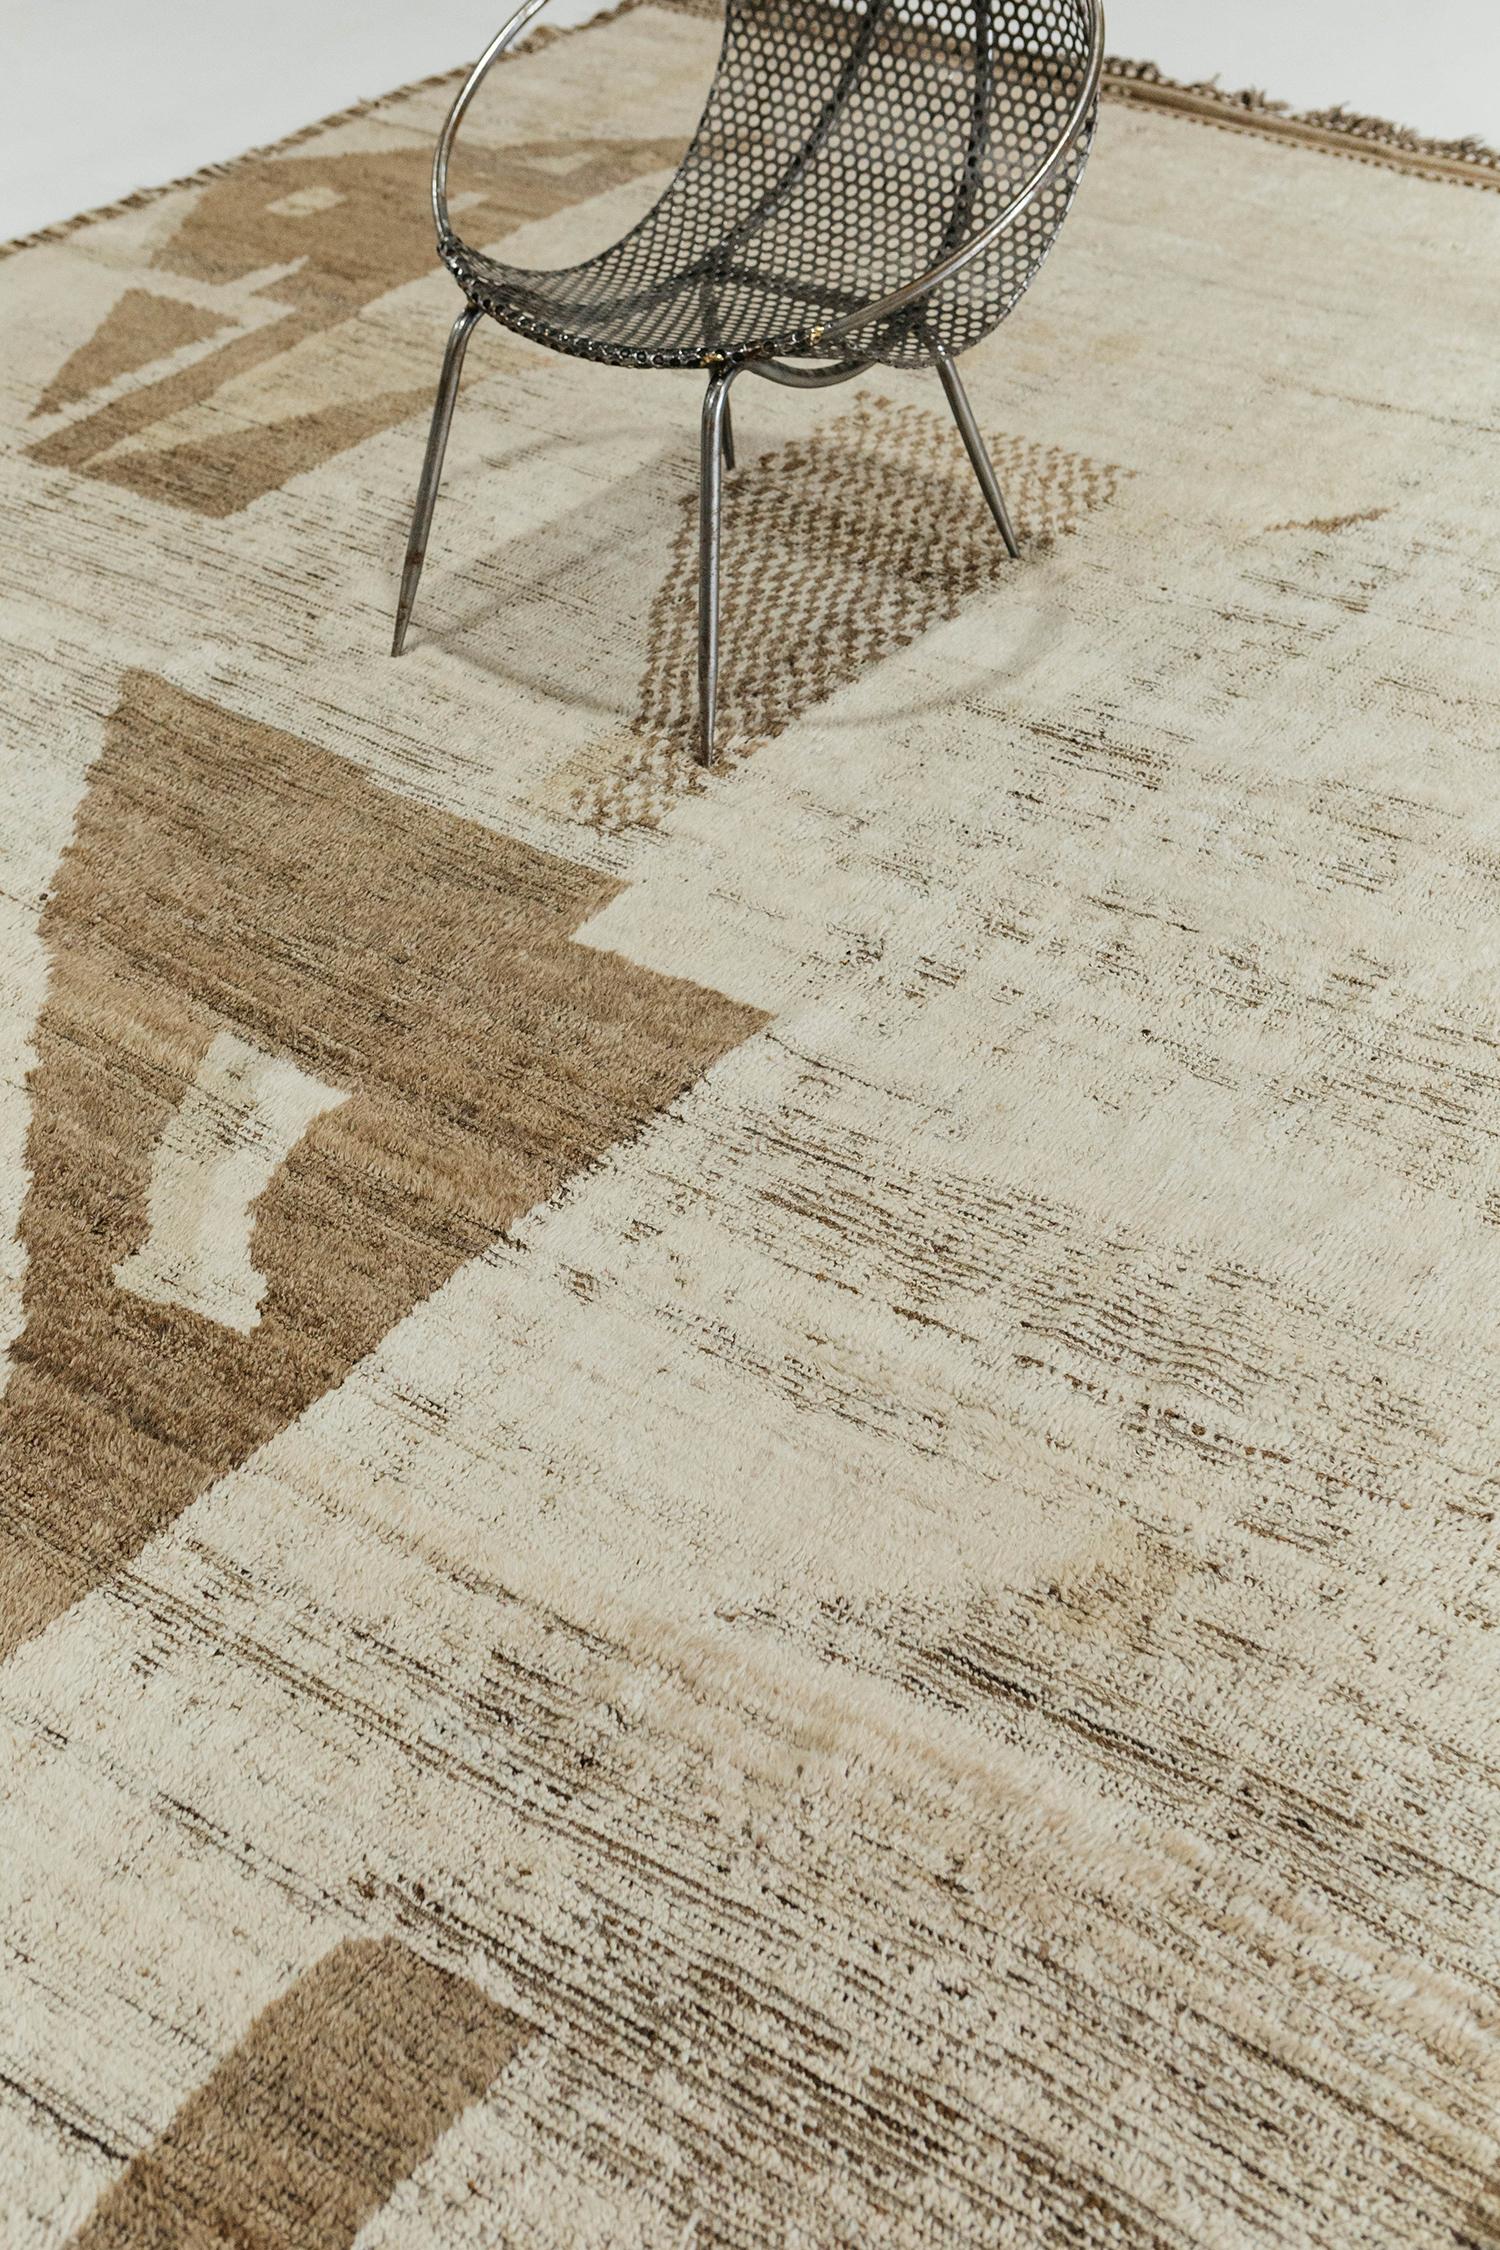 'Kaouki' is made of luxurious wool and is made of timeless design elements. Its weaving of natural earth tones and irregular patterns and shapes is what makes the Atlas Collection so unique and sought after. Mehraban's Atlas collection is noted for